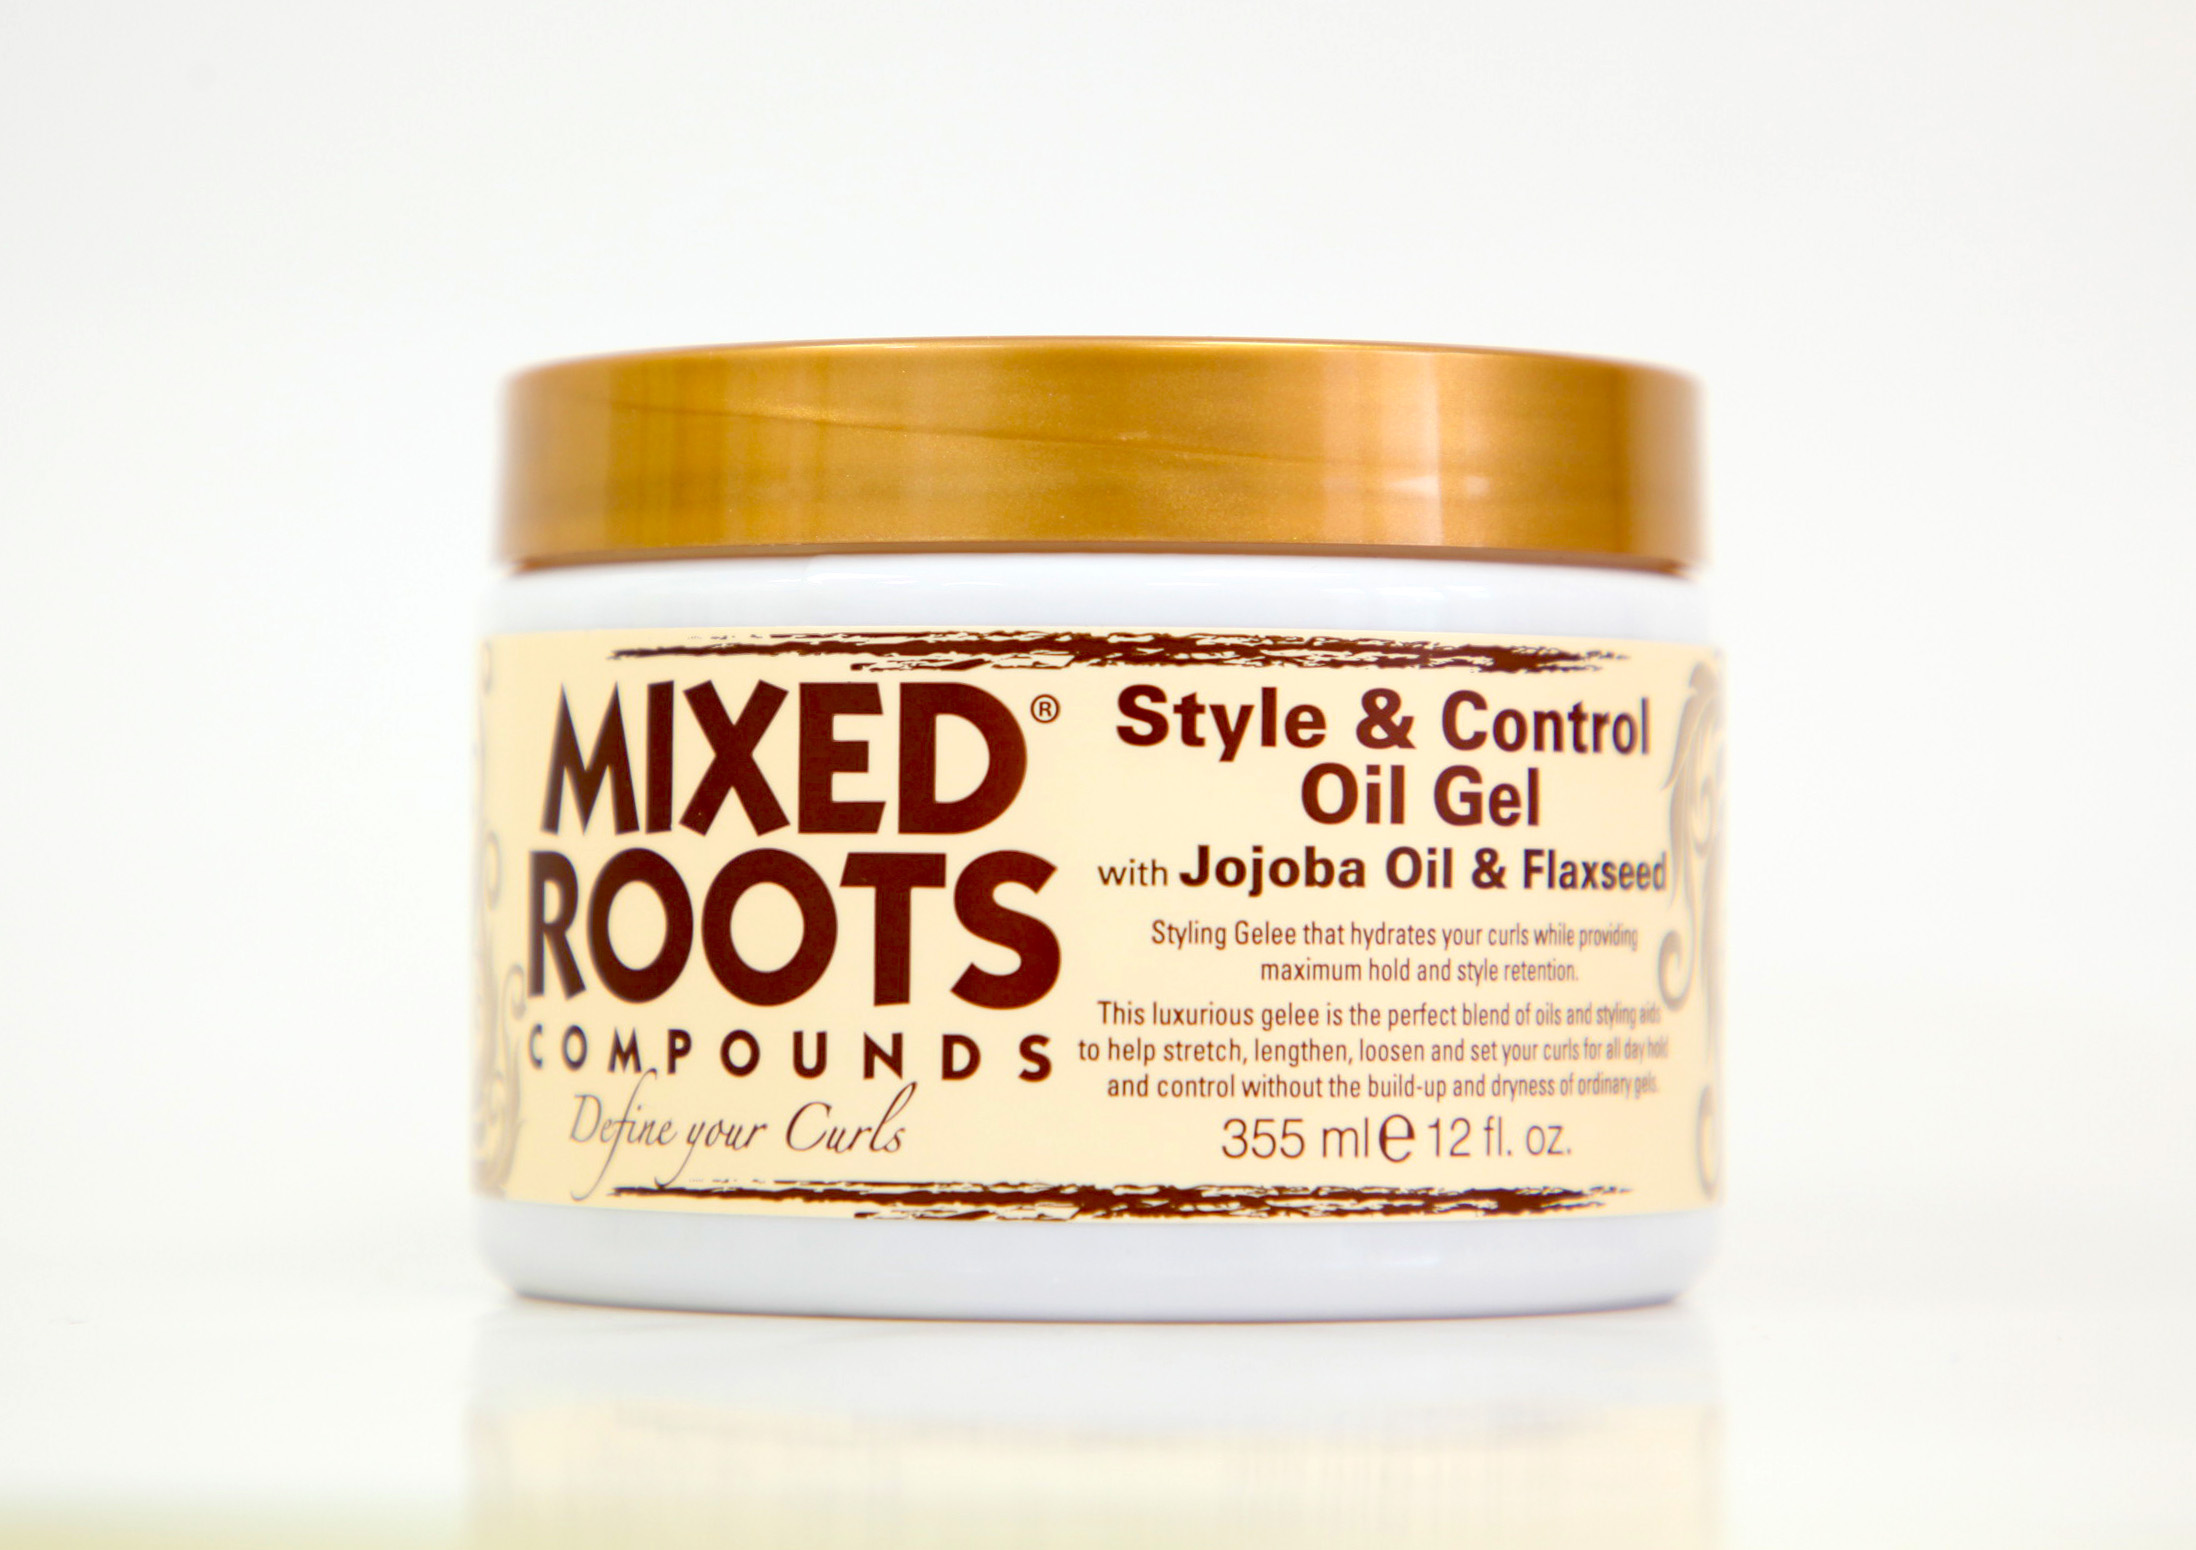 Mixed Roots Style & Control Oil Gel